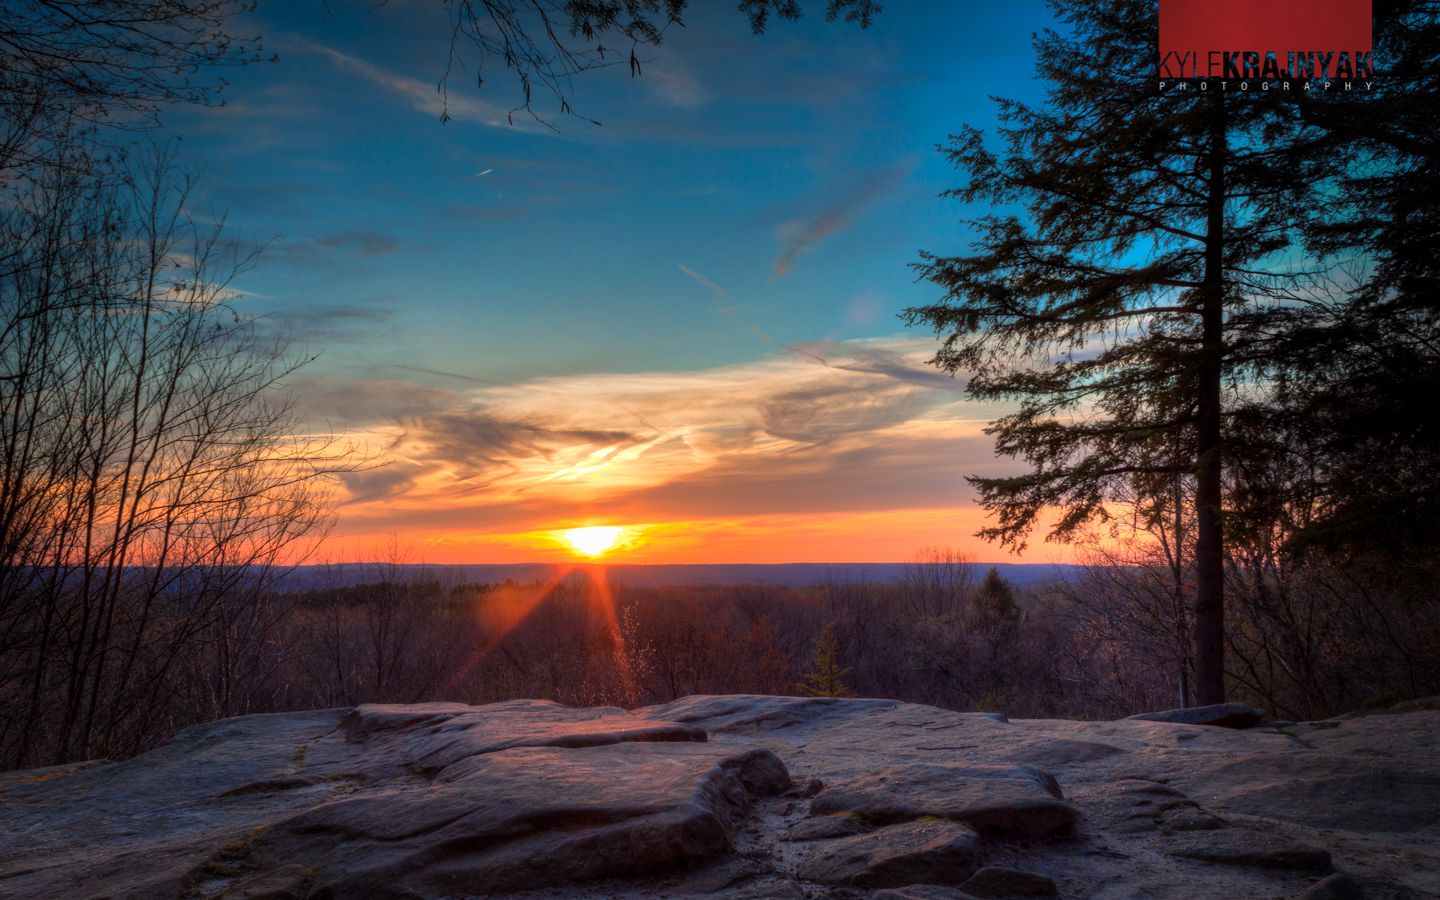 Sunset At Ledges Overlook In Cuyahoga Valley National Park